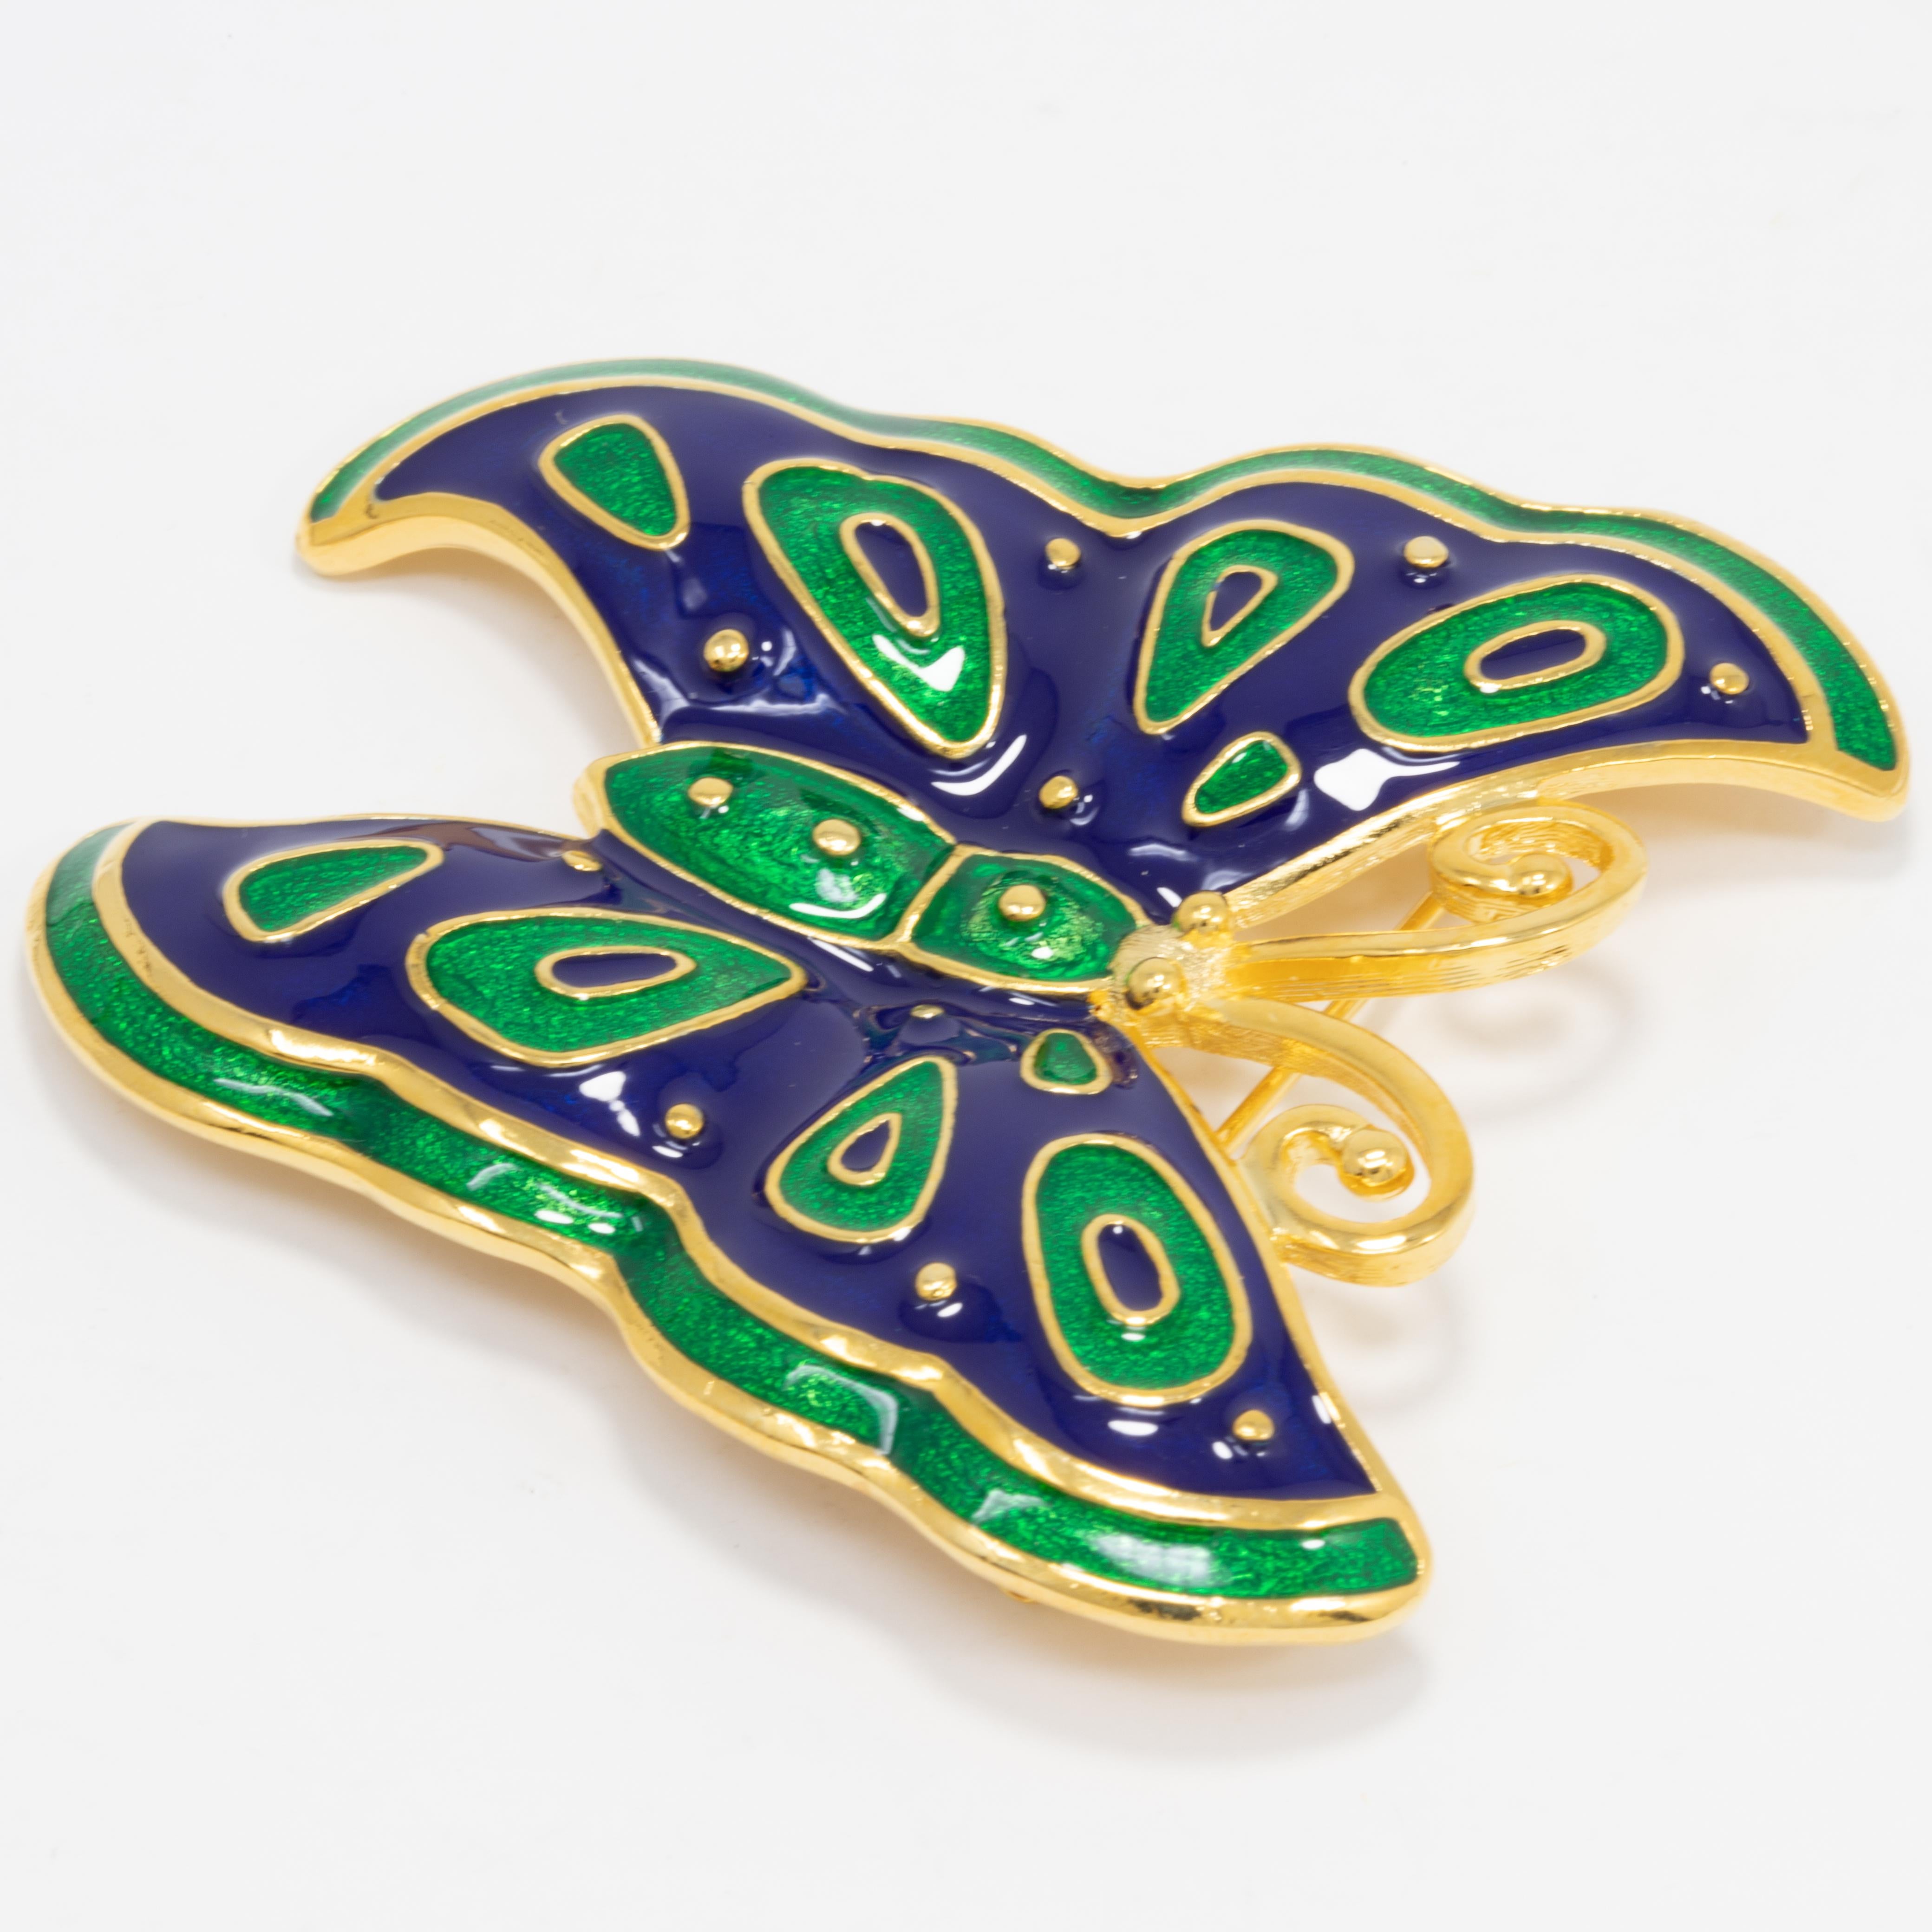 A stylish butterfly pin brooch from Kenneth Jay Lane. This golden critter is painted with emerald green and indigo blue enamel.

Marks / hallmarks / etc: Kenneth Lane, Made in USA